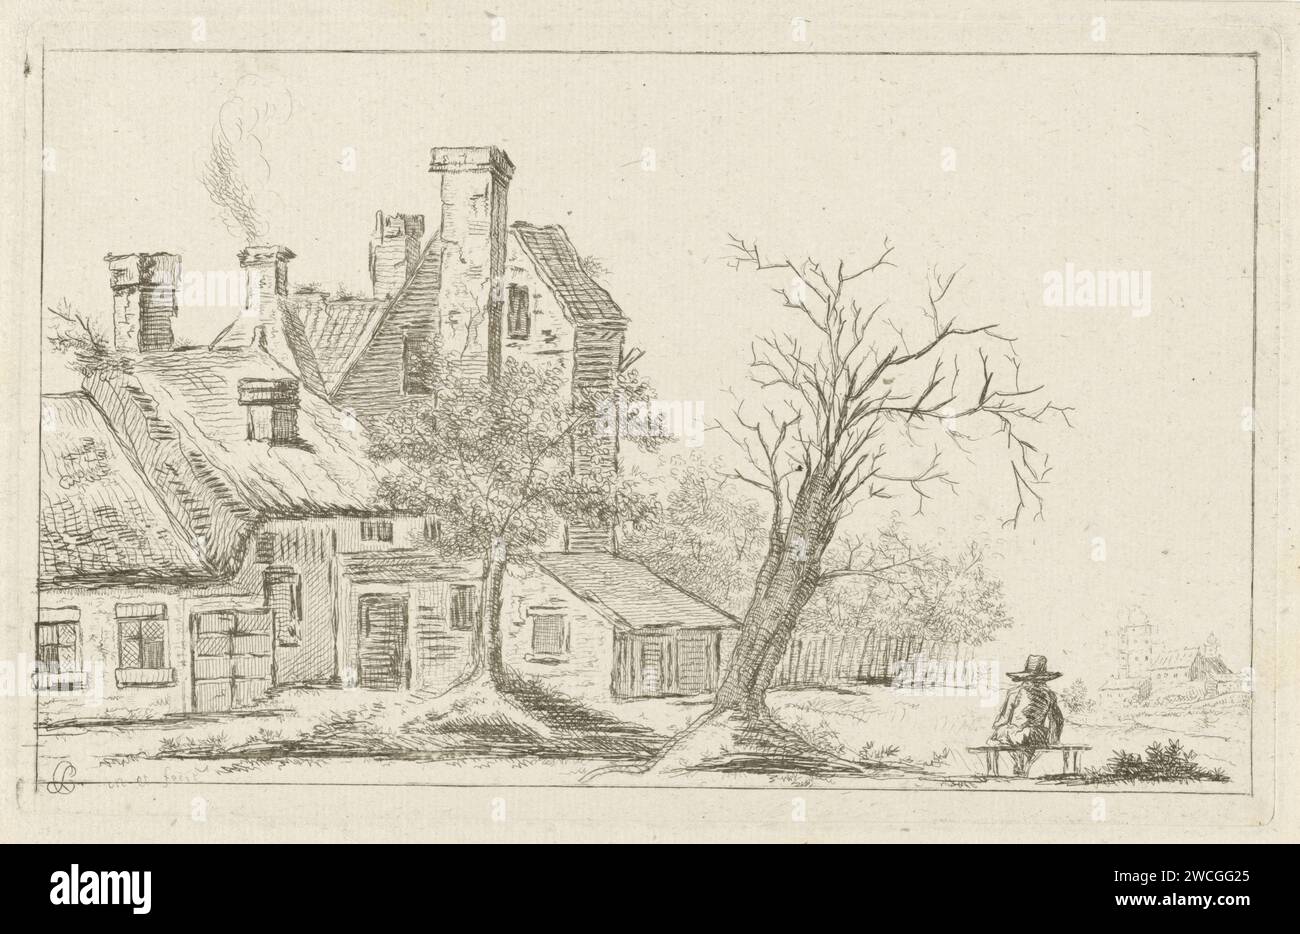 Landscape with houses, Charles de Ligne, 1774 - 1792 print Landscape with houses, on the right a man is sitting on a bank.  paper etching city-view, and landscape with man-made constructions Stock Photo